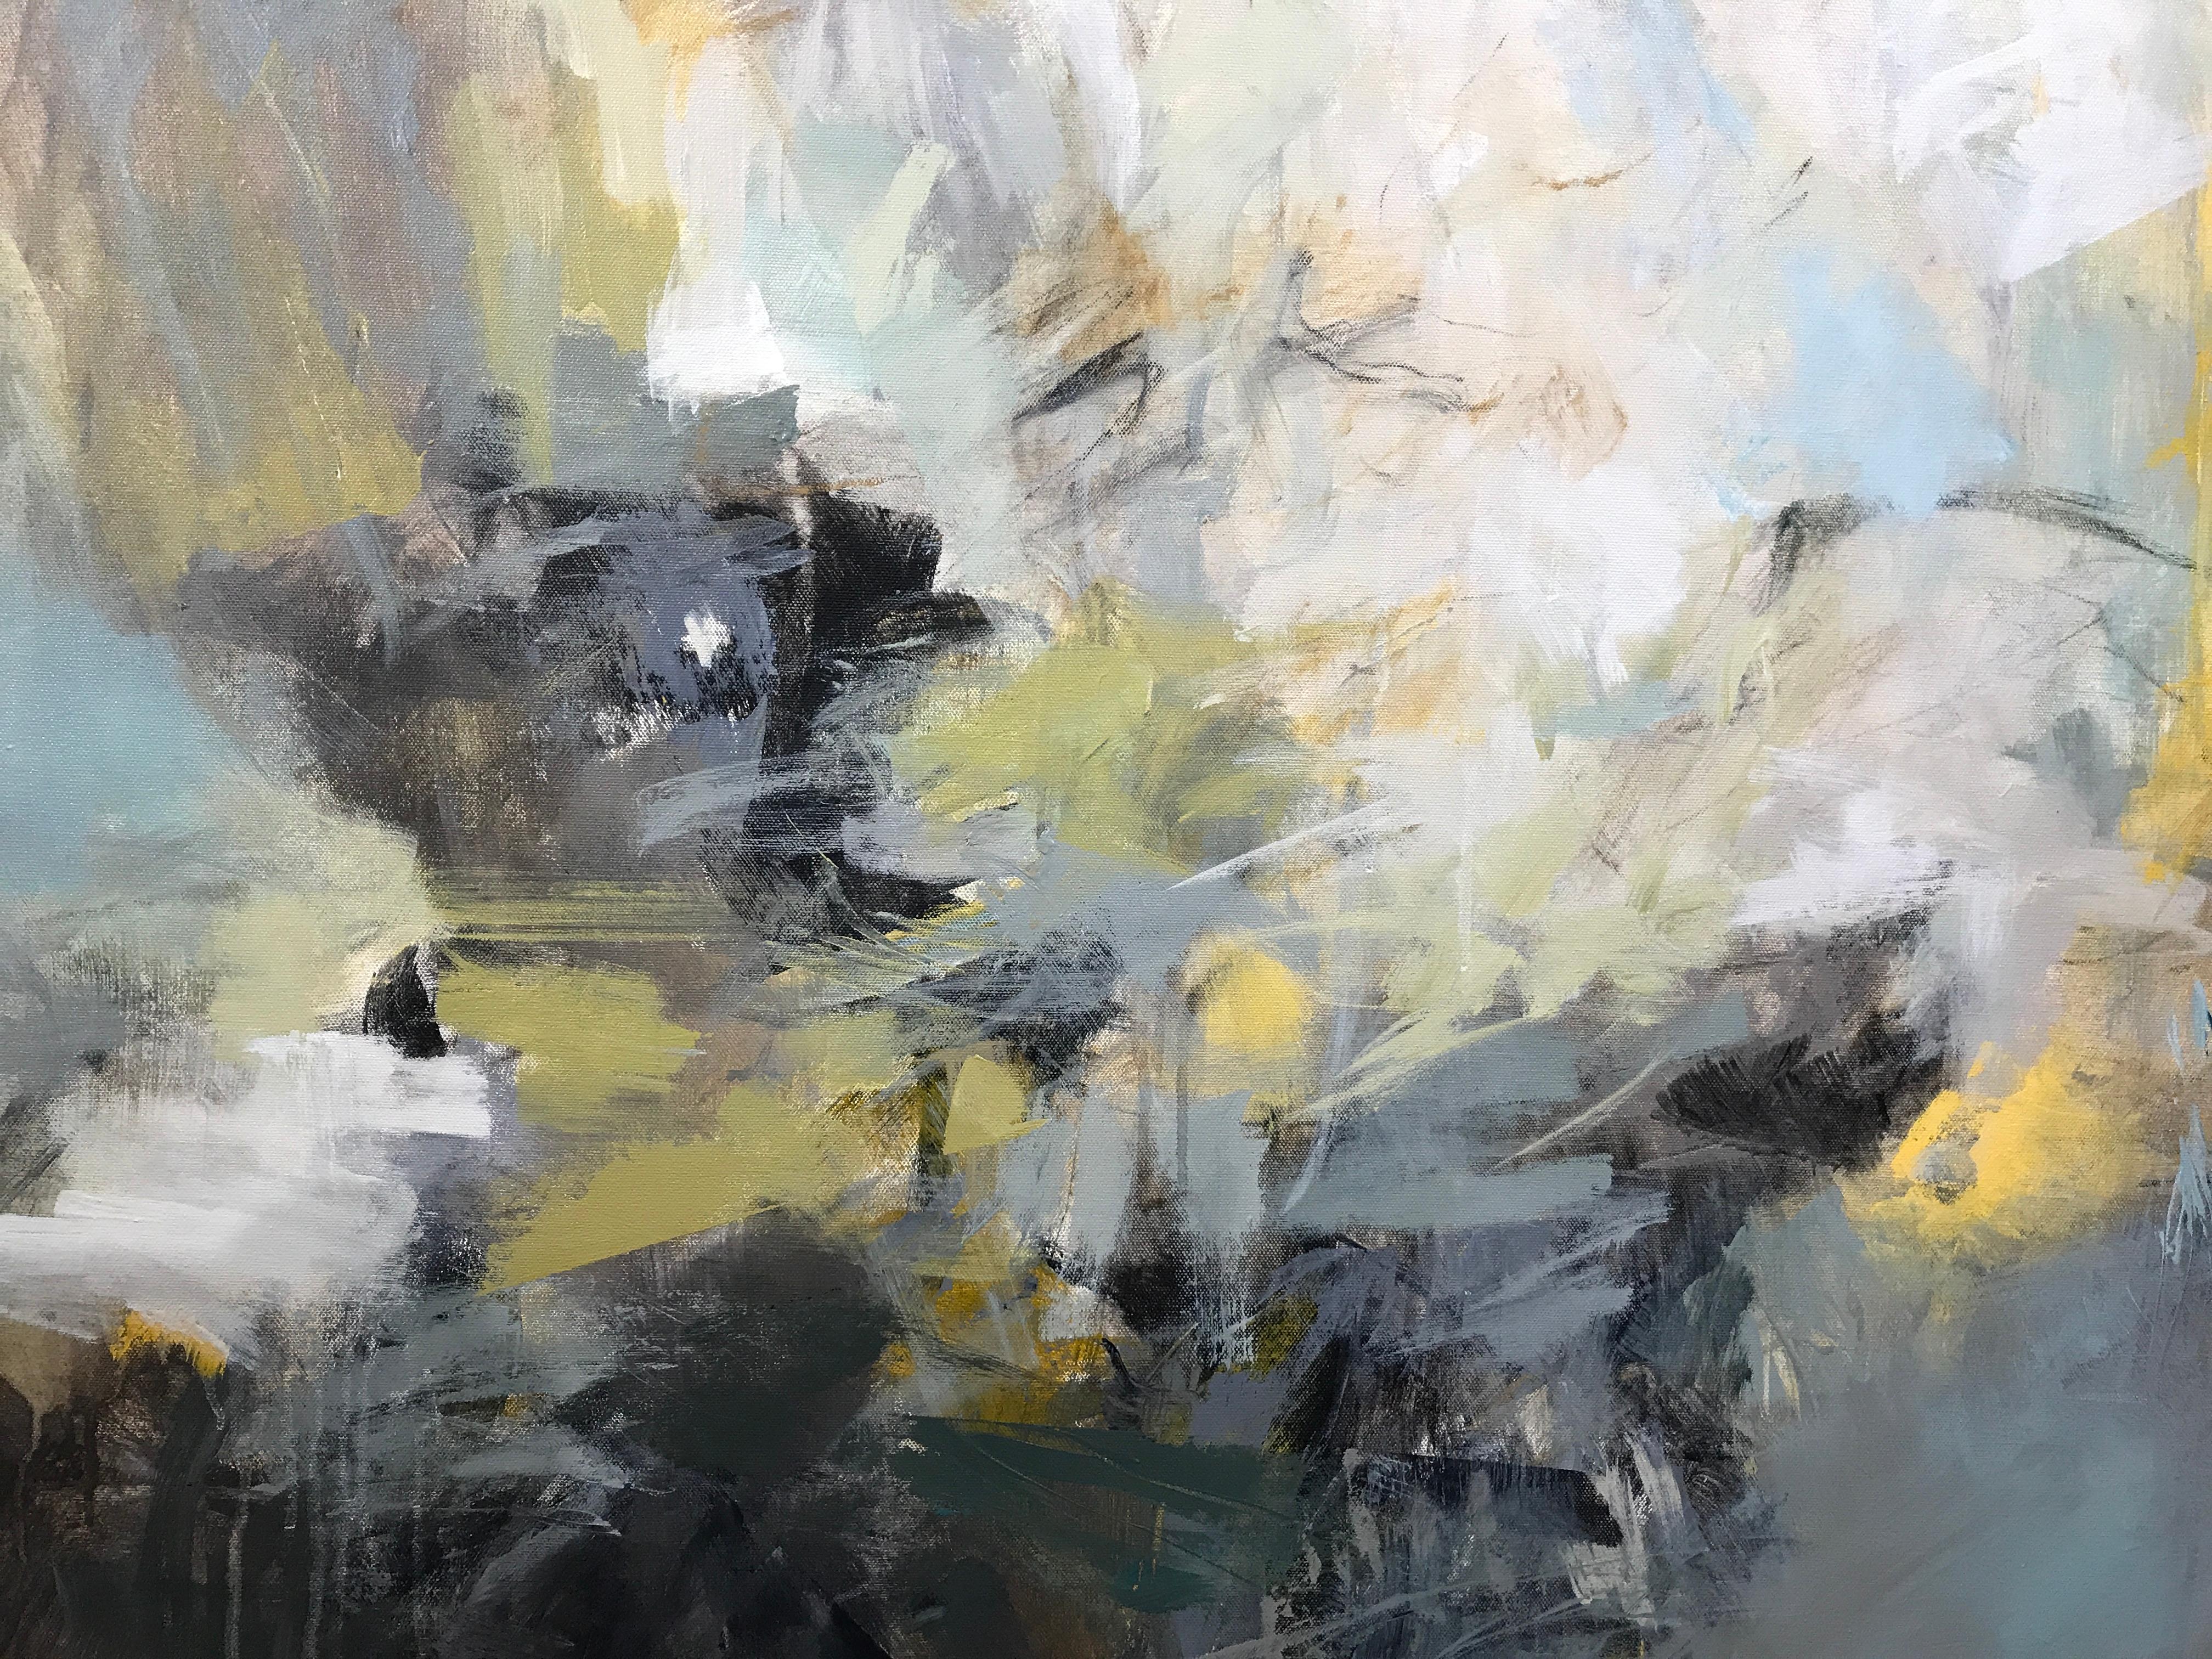 'Excavation' is a horizontal abstract acrylic on canvas painting created by American artist Debora Stewart in 2018. Featuring a palette made of gold, black, grey, white and light blue tones, this unframed abstract painting captures our attention